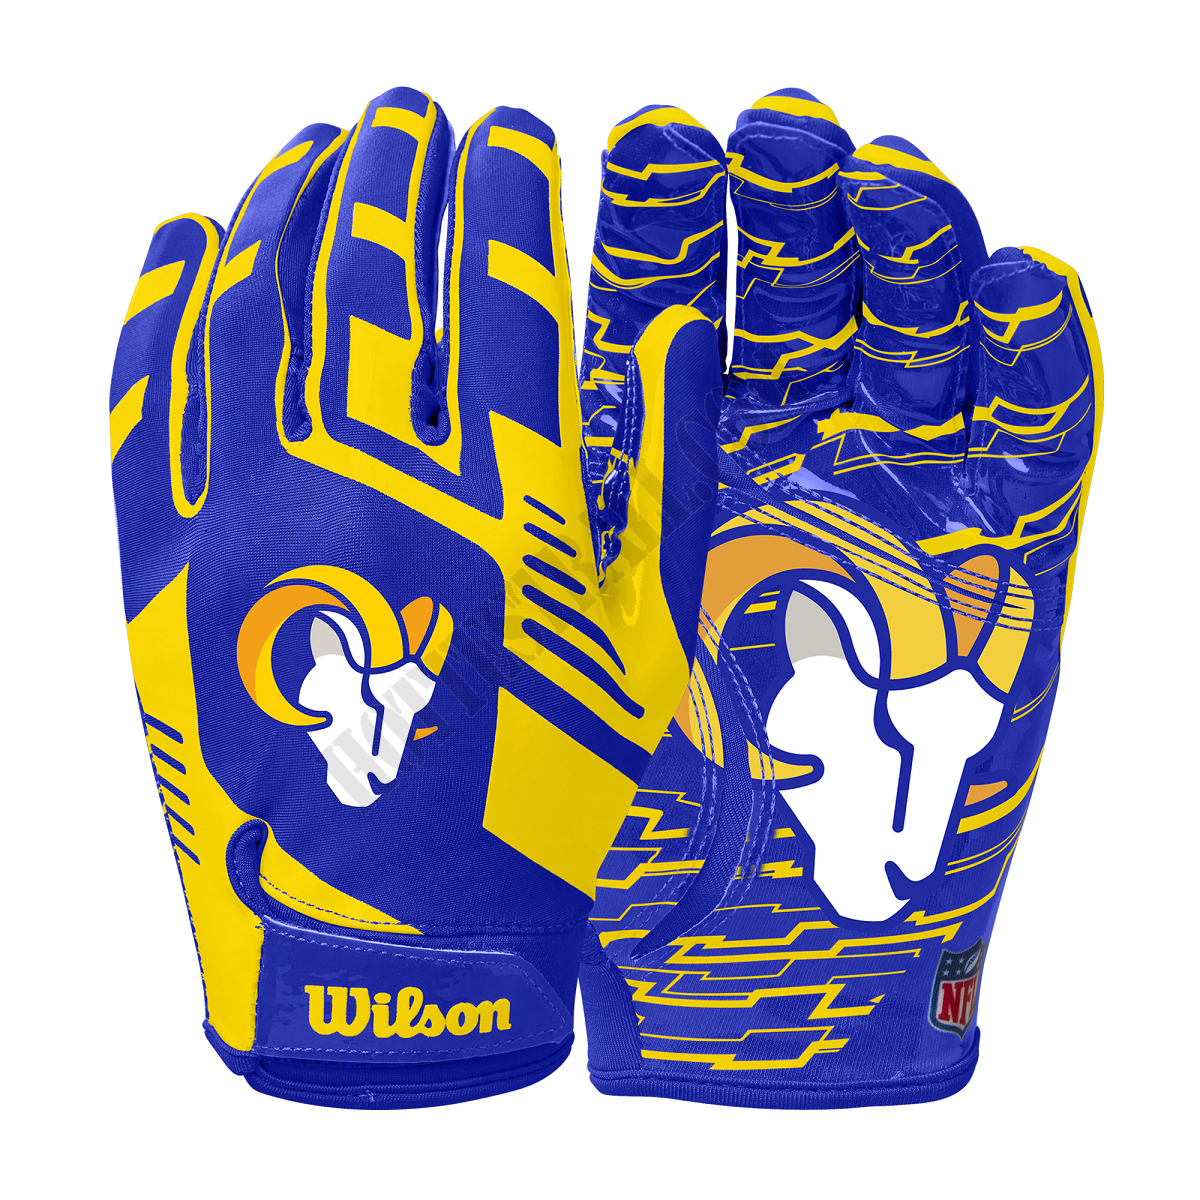 NFL Stretch Fit Receivers Gloves -  Los Angeles Rams ● Wilson Promotions - NFL Stretch Fit Receivers Gloves -  Los Angeles Rams ● Wilson Promotions